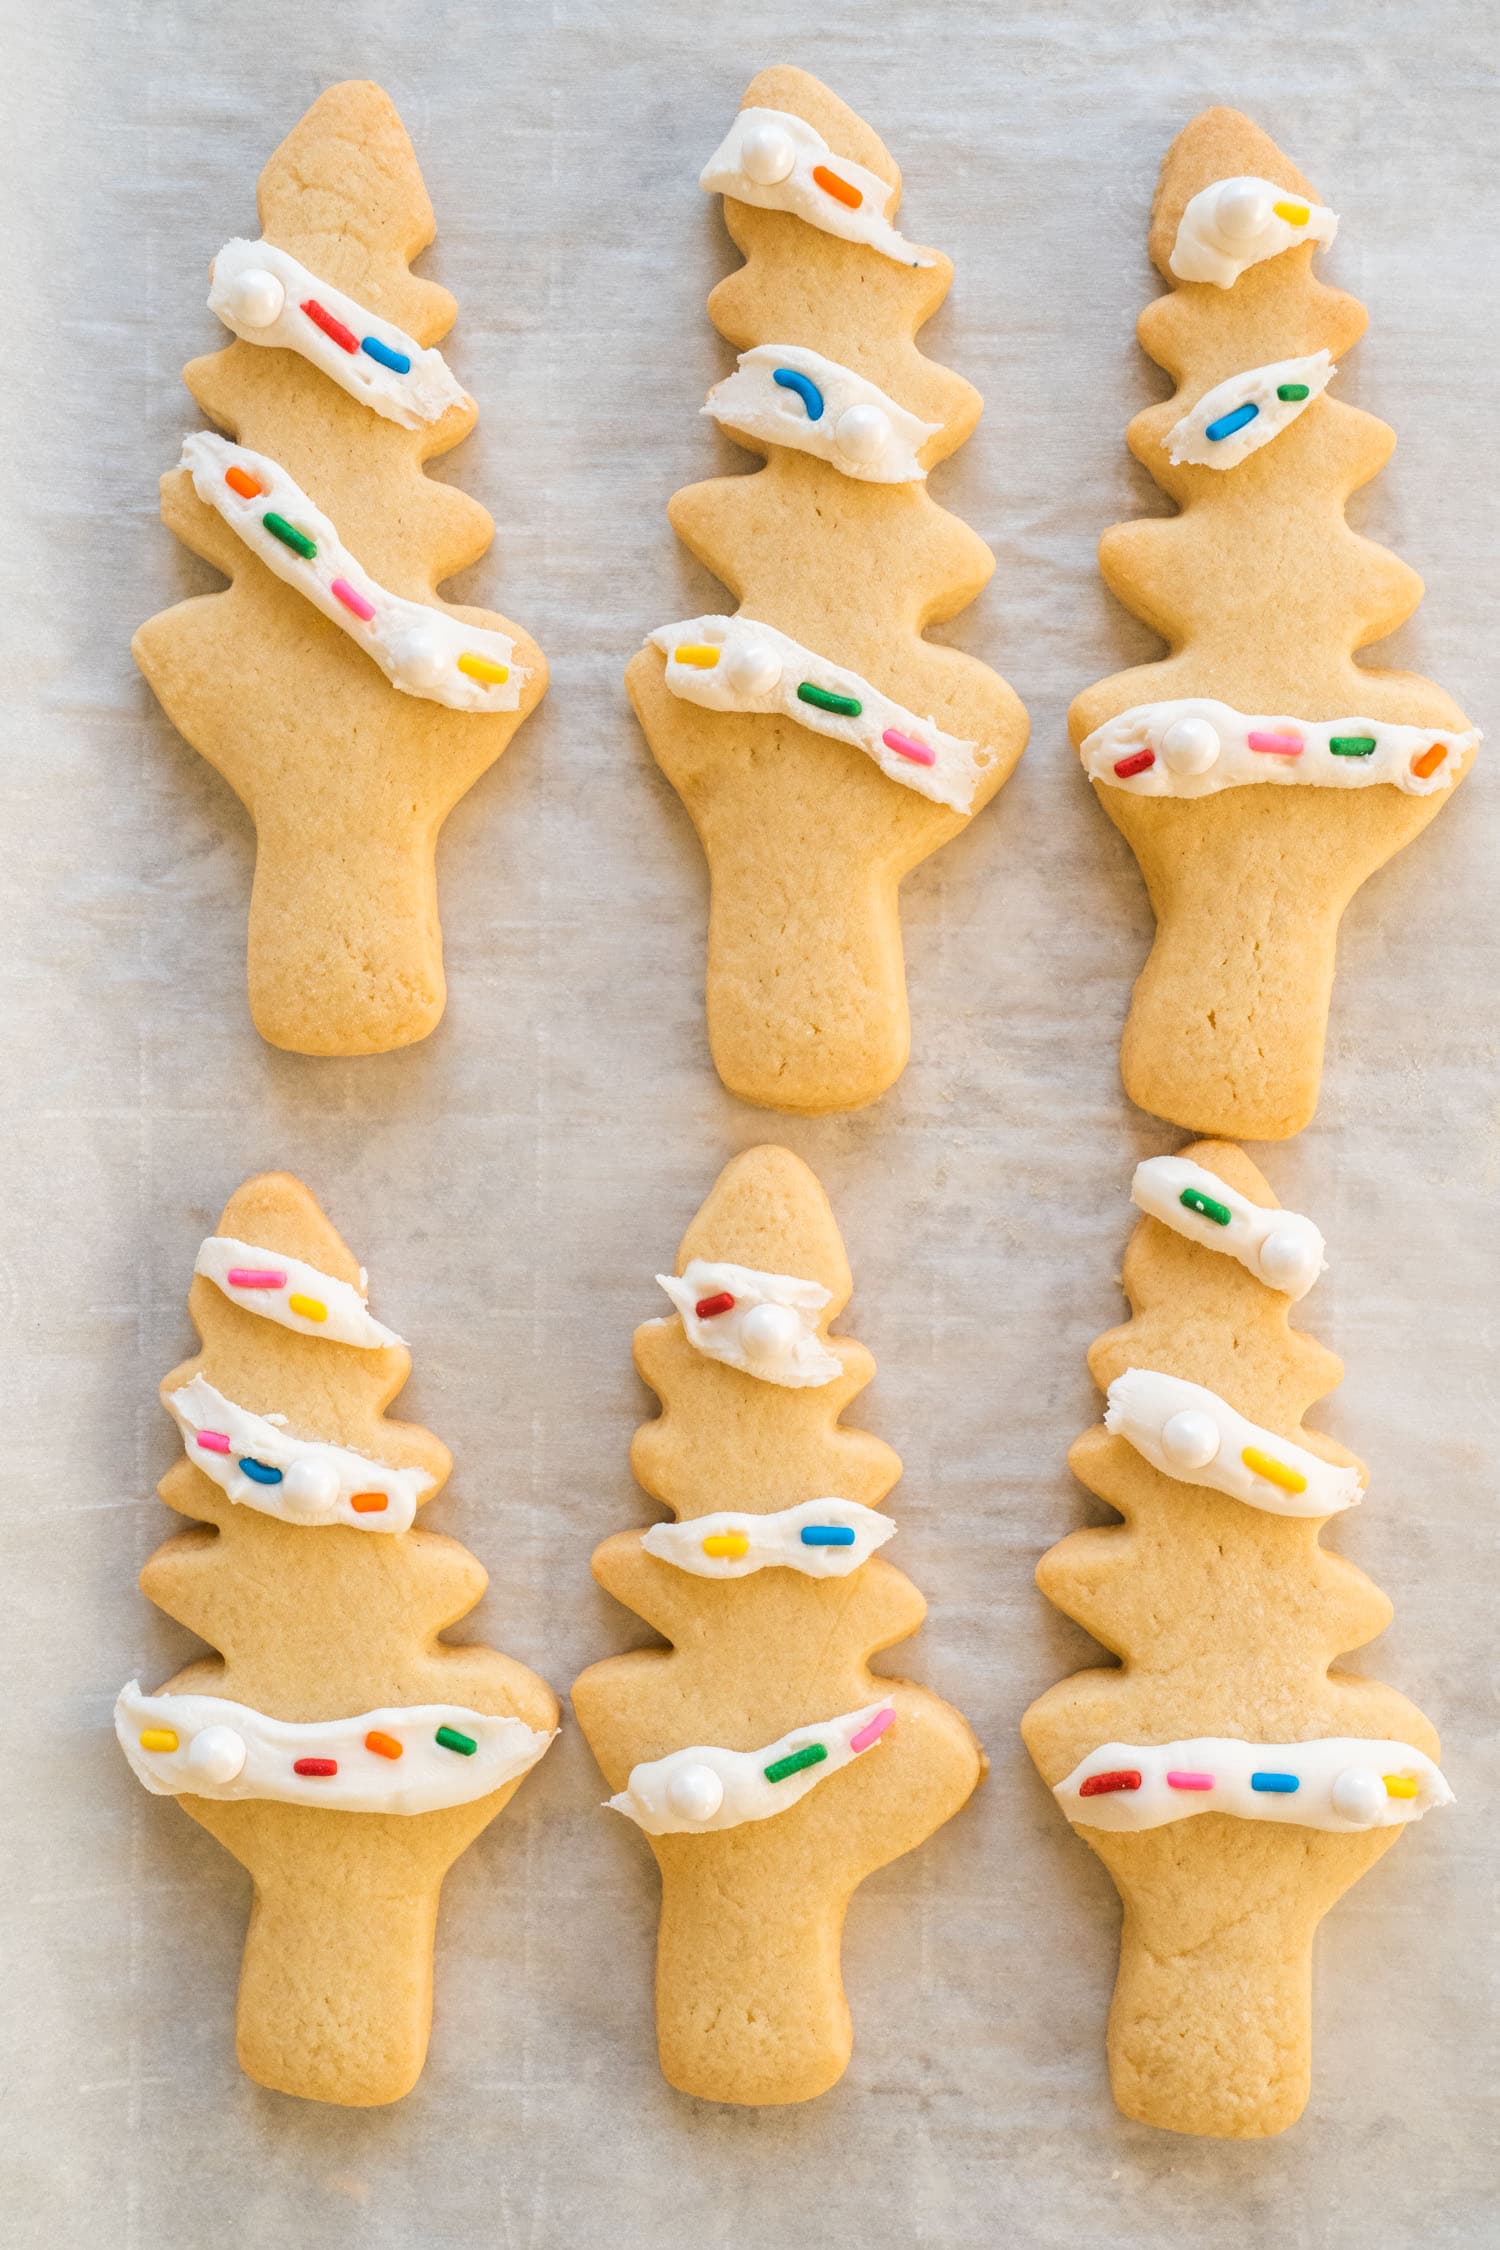 Christmas Sugar Cookie Cut-Outs - Dessert for Two